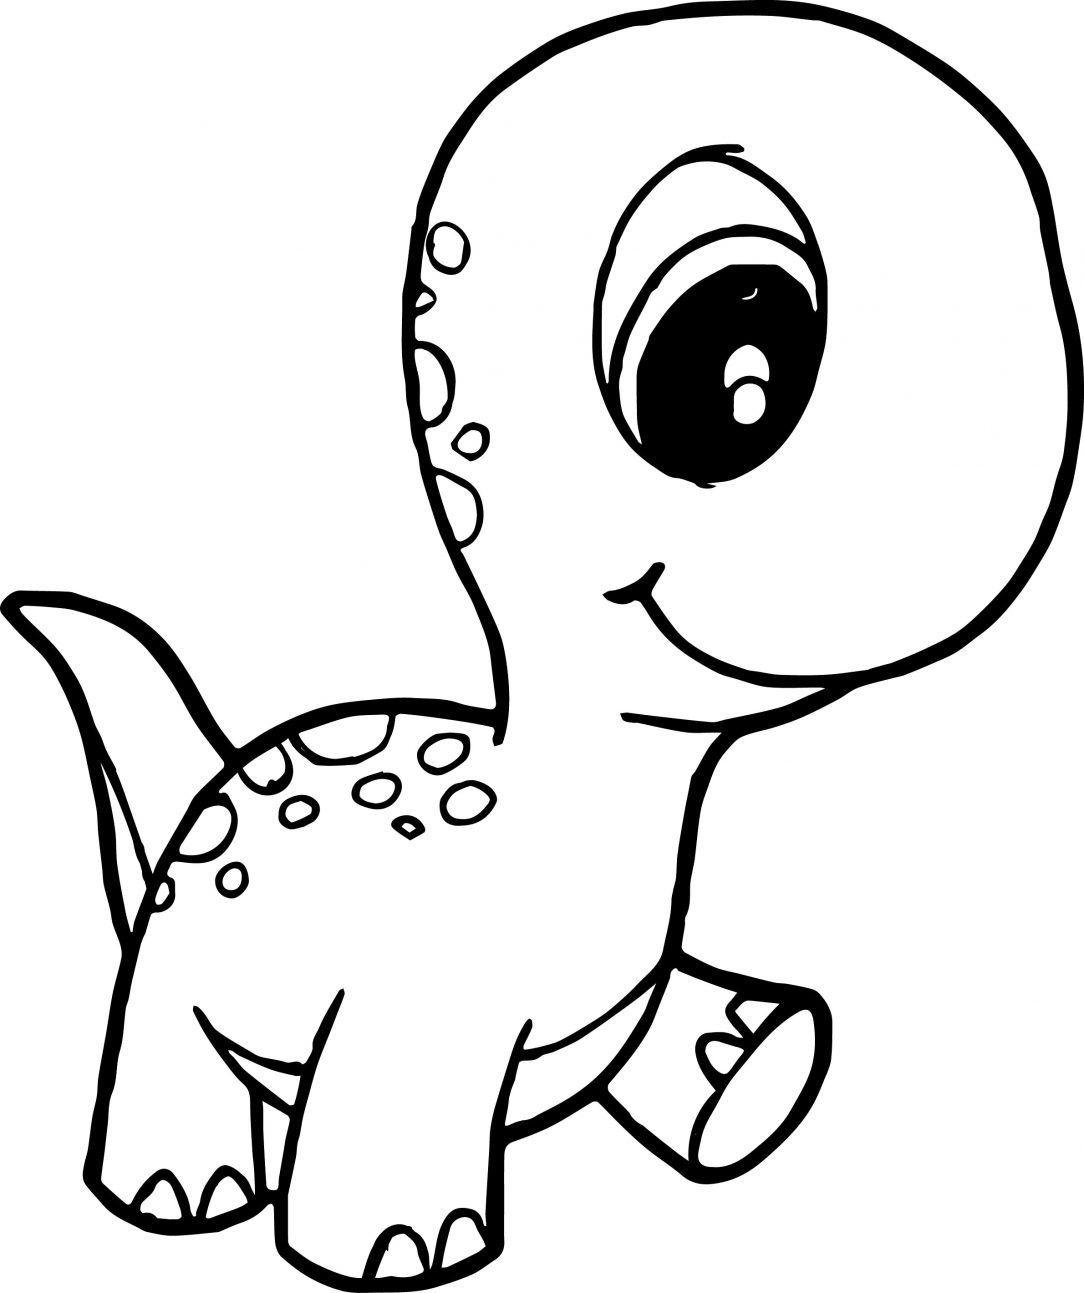 Simple Dinosaur Drawing | Free download on ClipArtMag